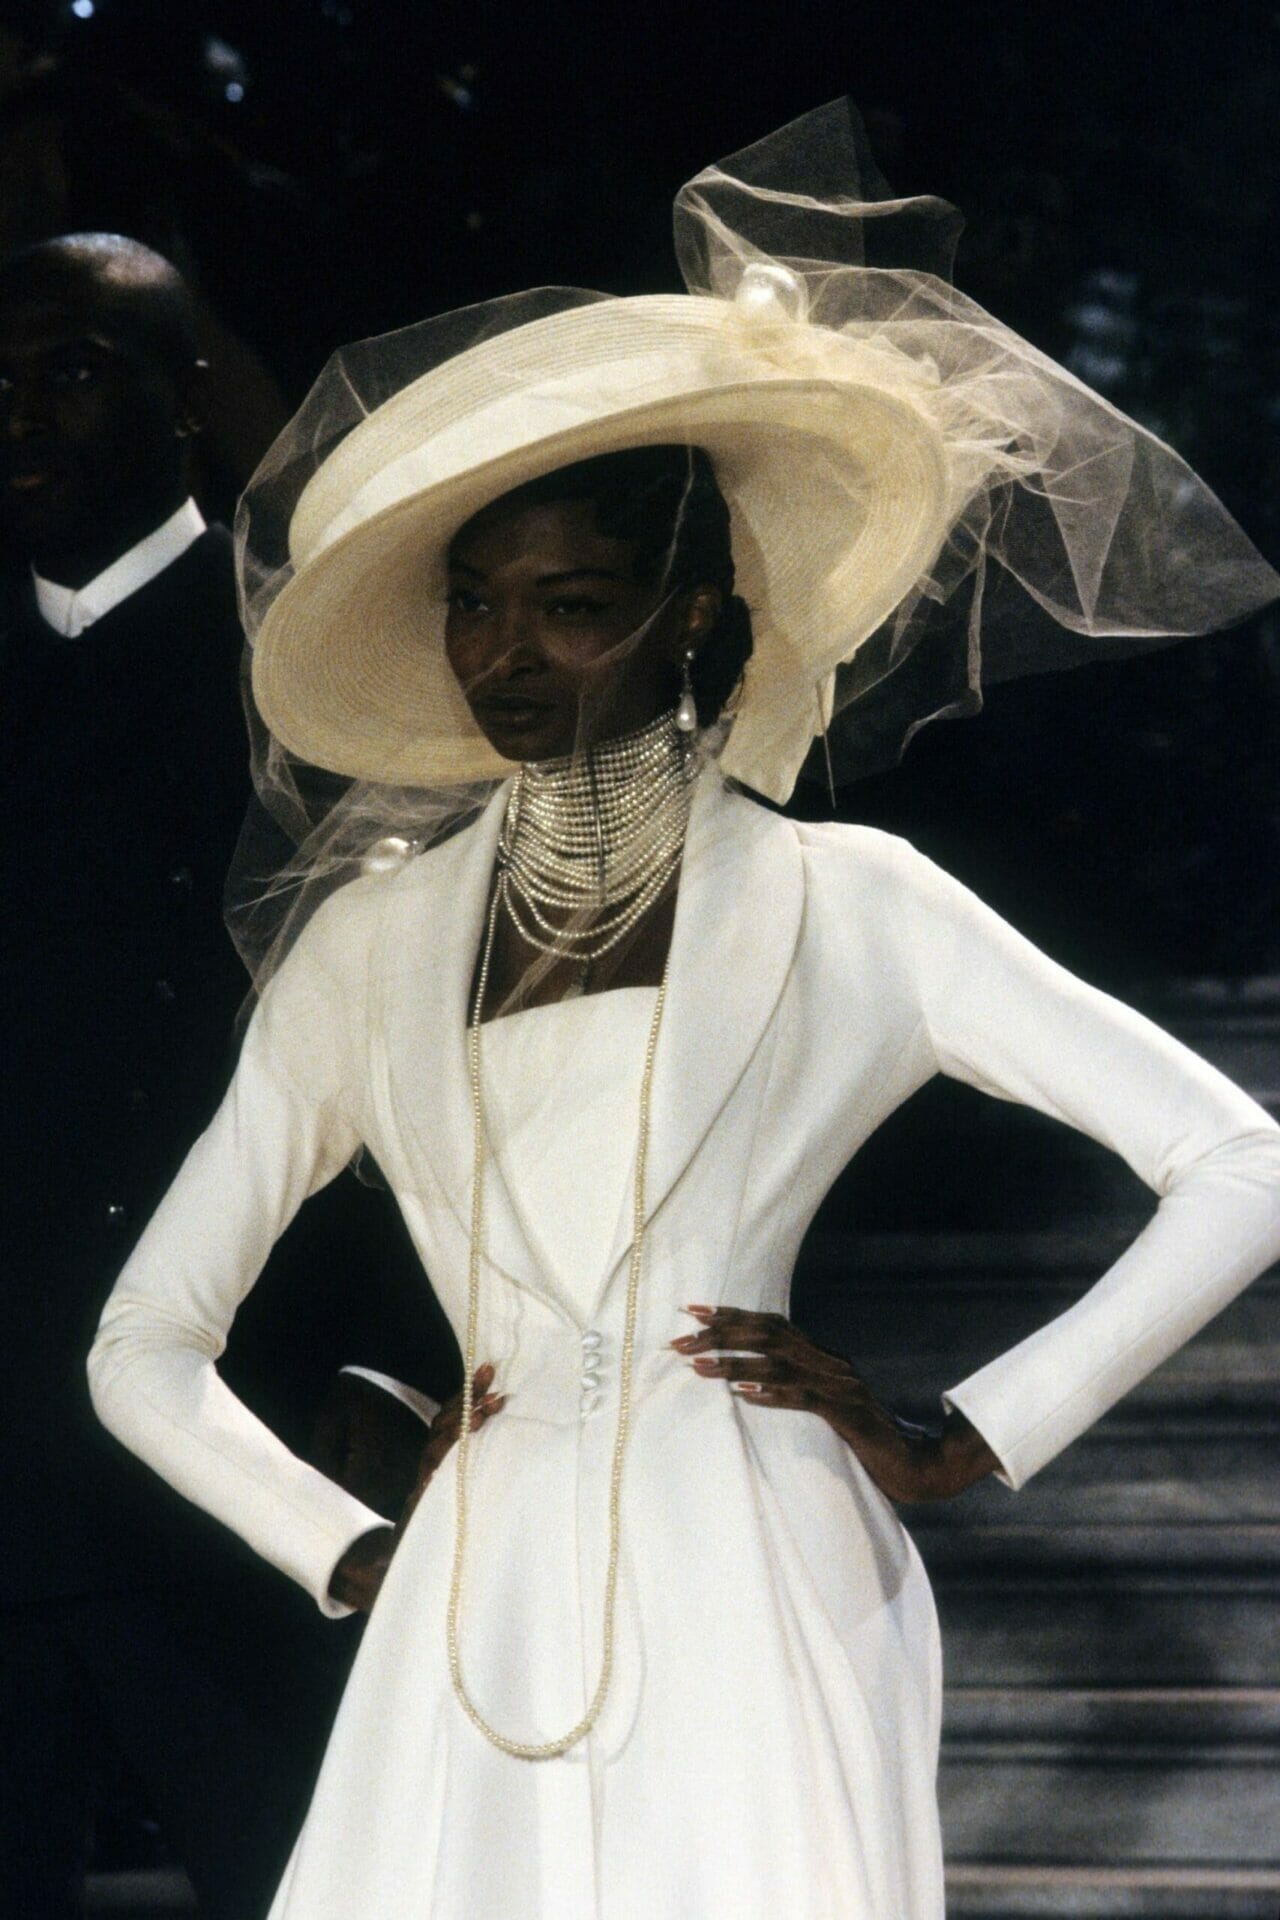 Runway Archive: Christian Dior Couture, 1998